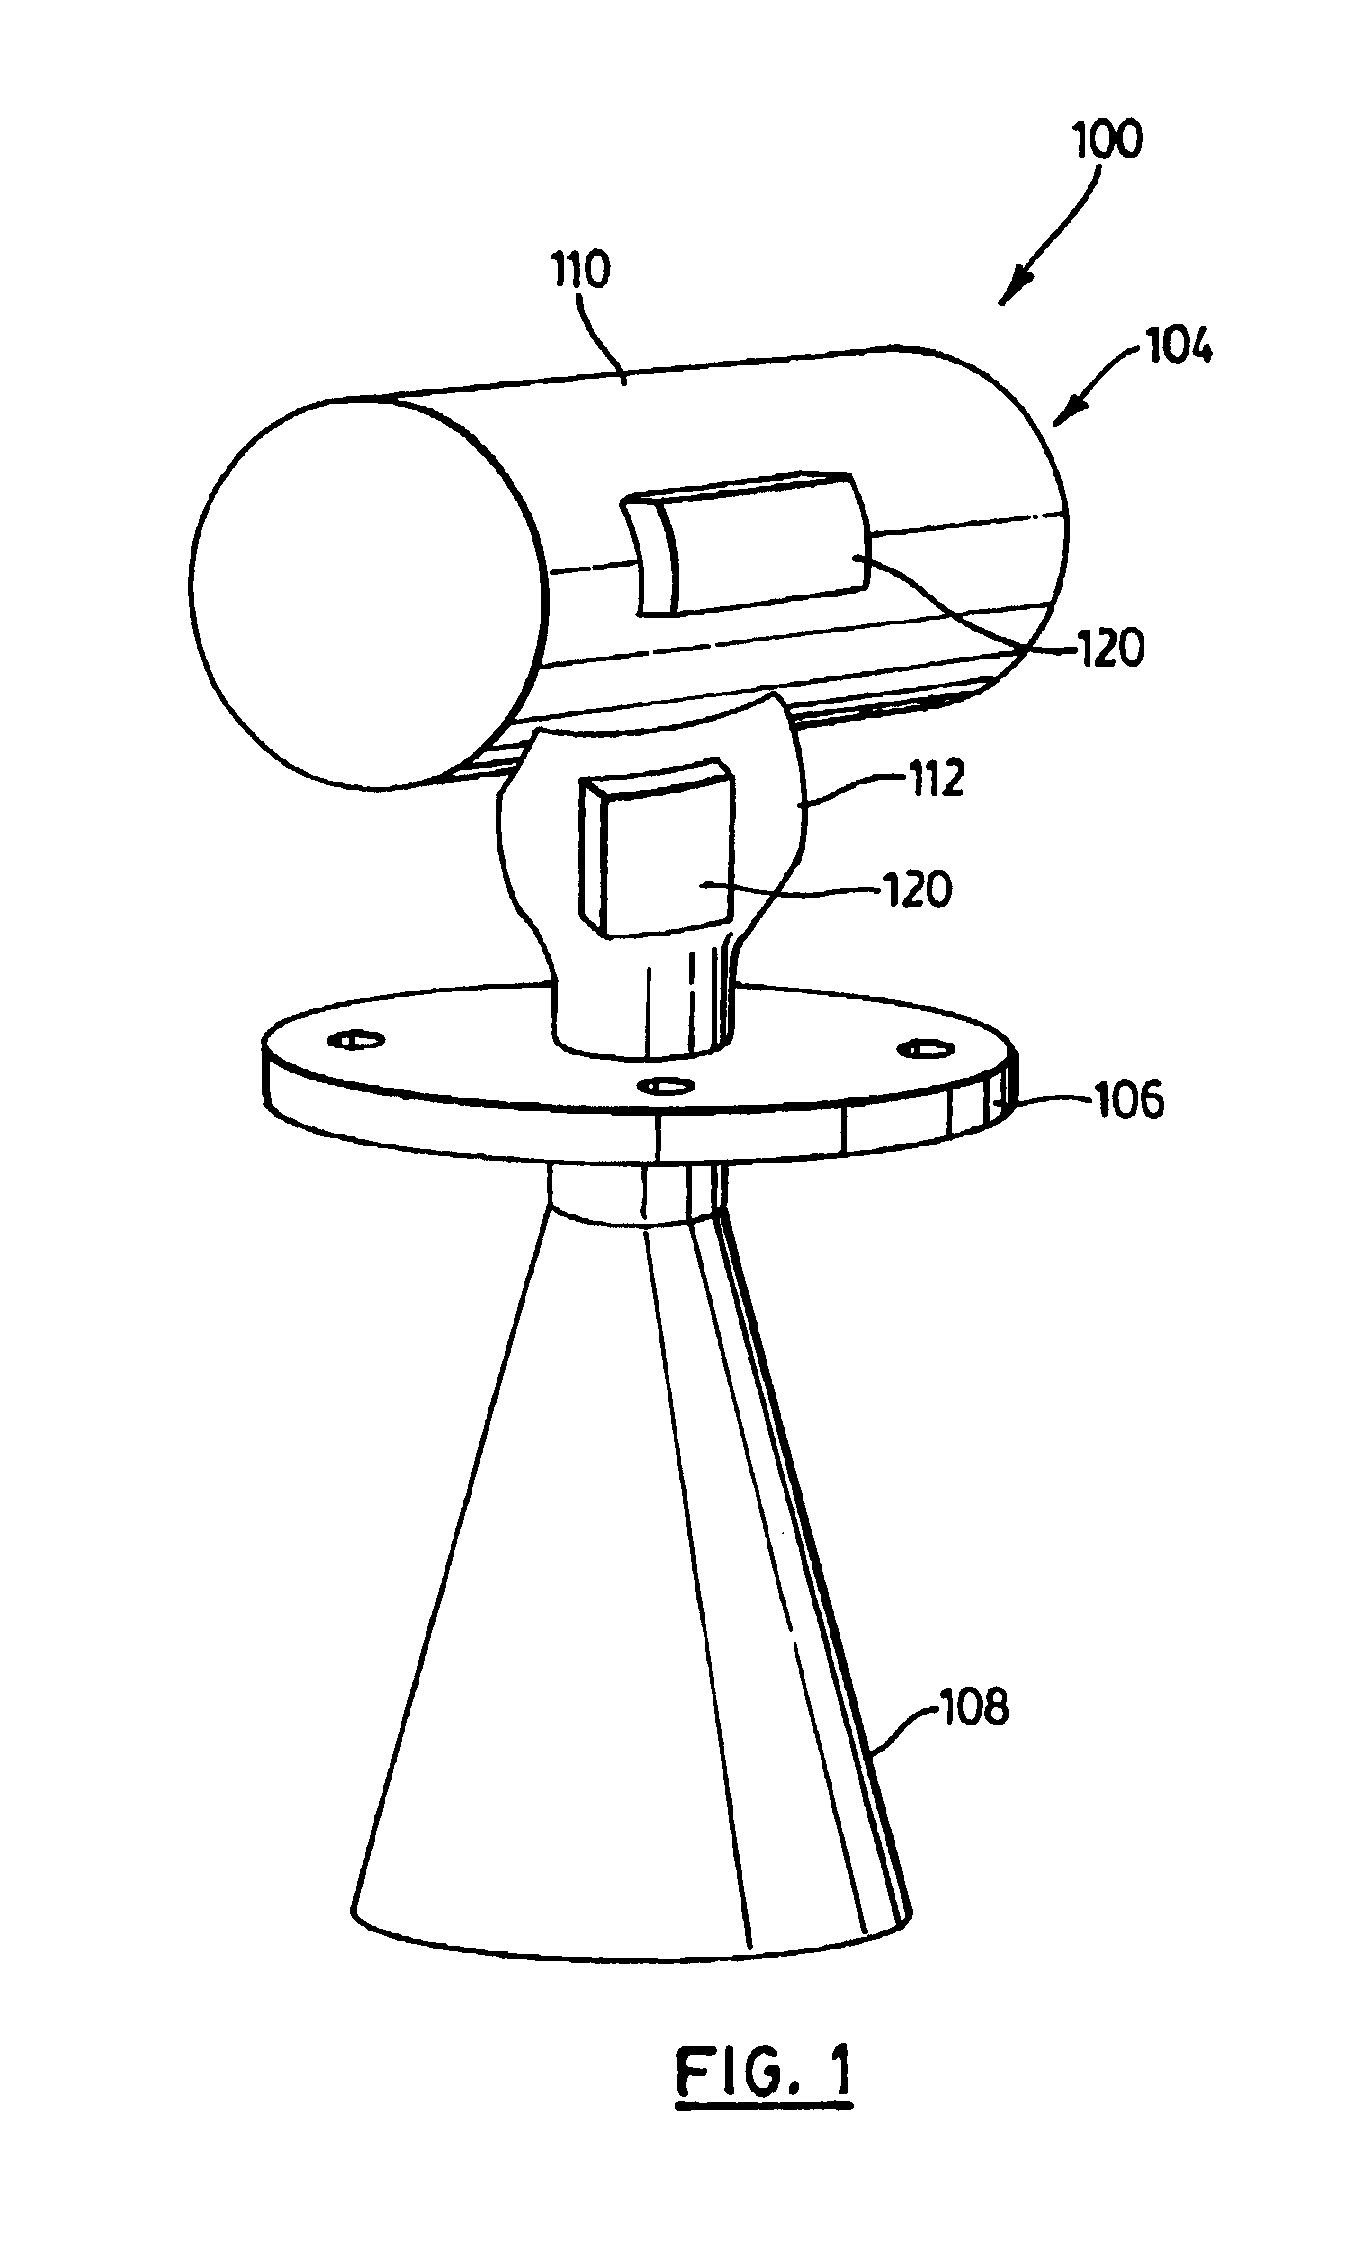 Vibratory cleaning mechanism for an antenna in a time-of-flight based level measurement system